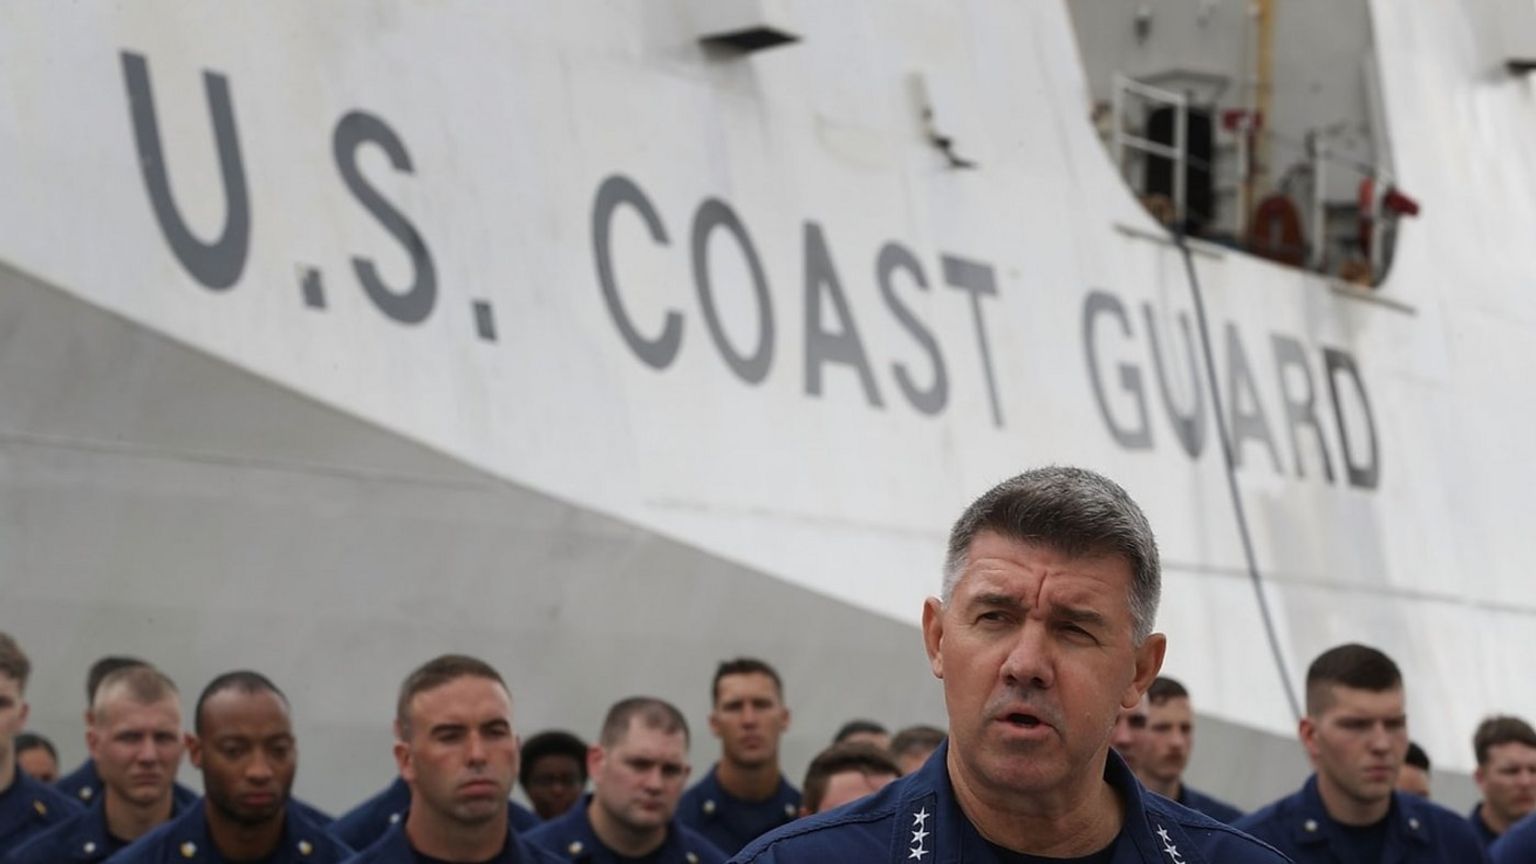 The U.S. Coast Guard was targeted by hackers